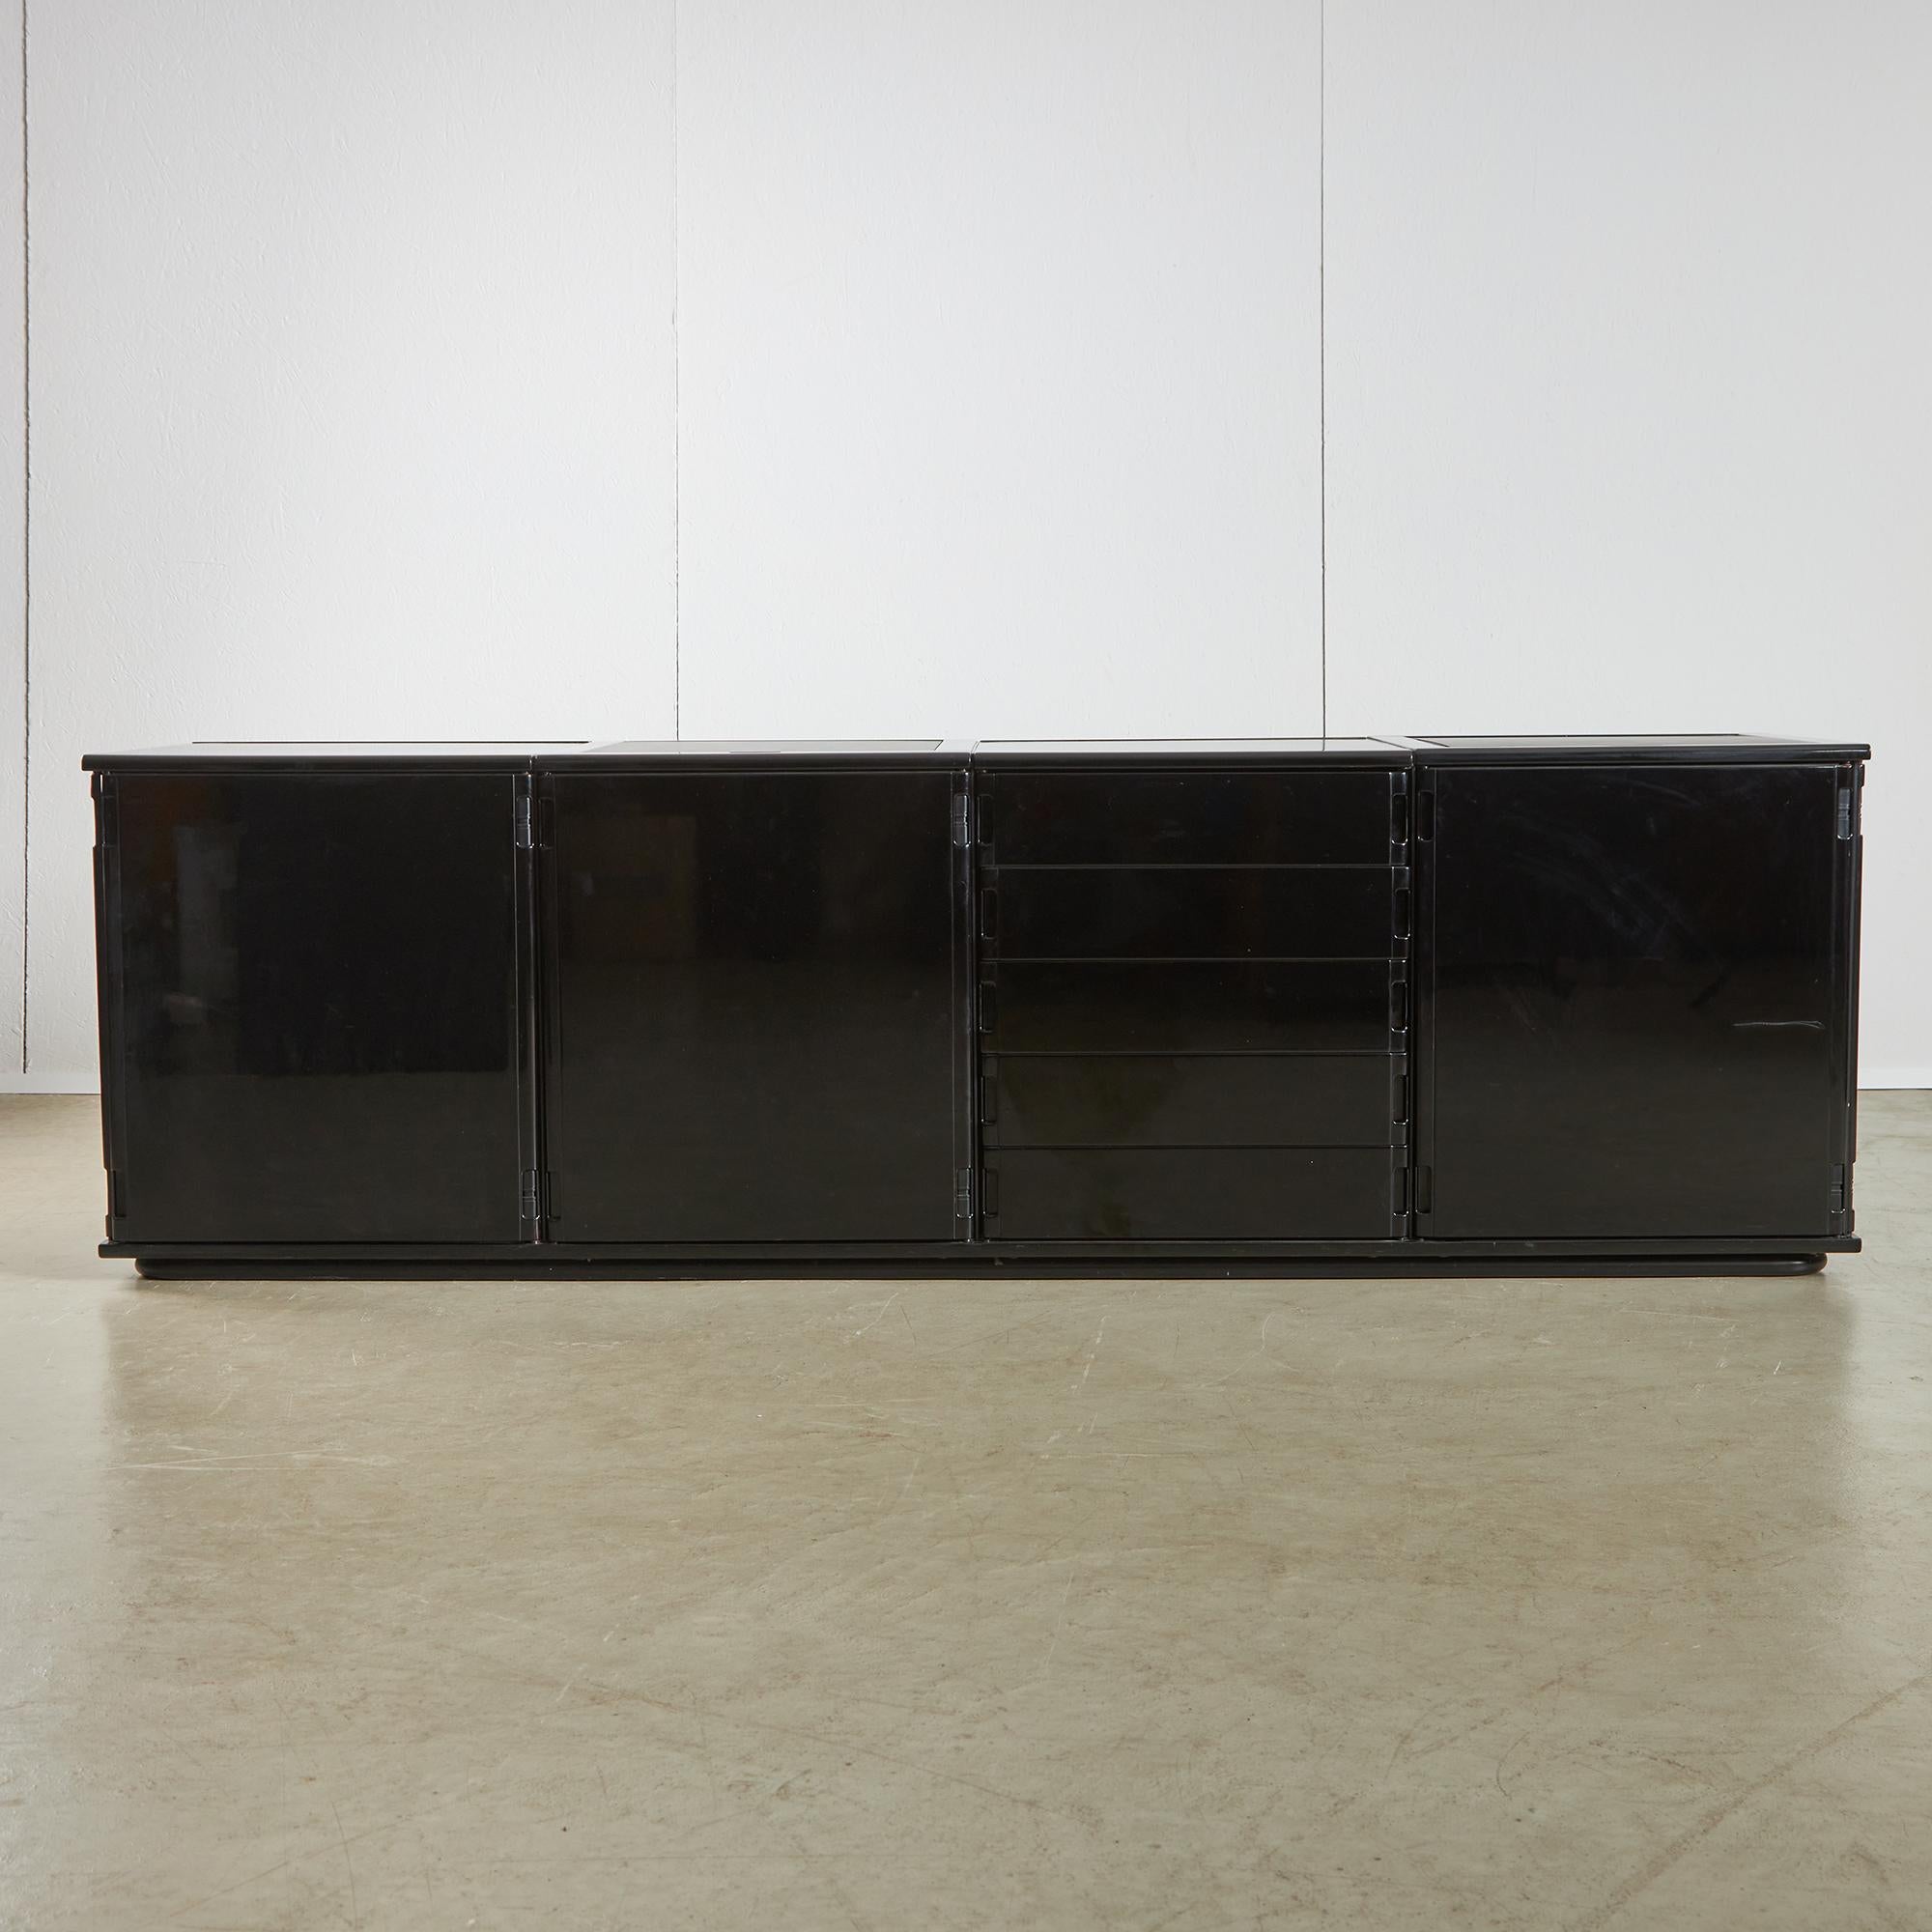 Italian Larco Series Sideboard by Gianfranco Frattini for Molteni, 1970s For Sale